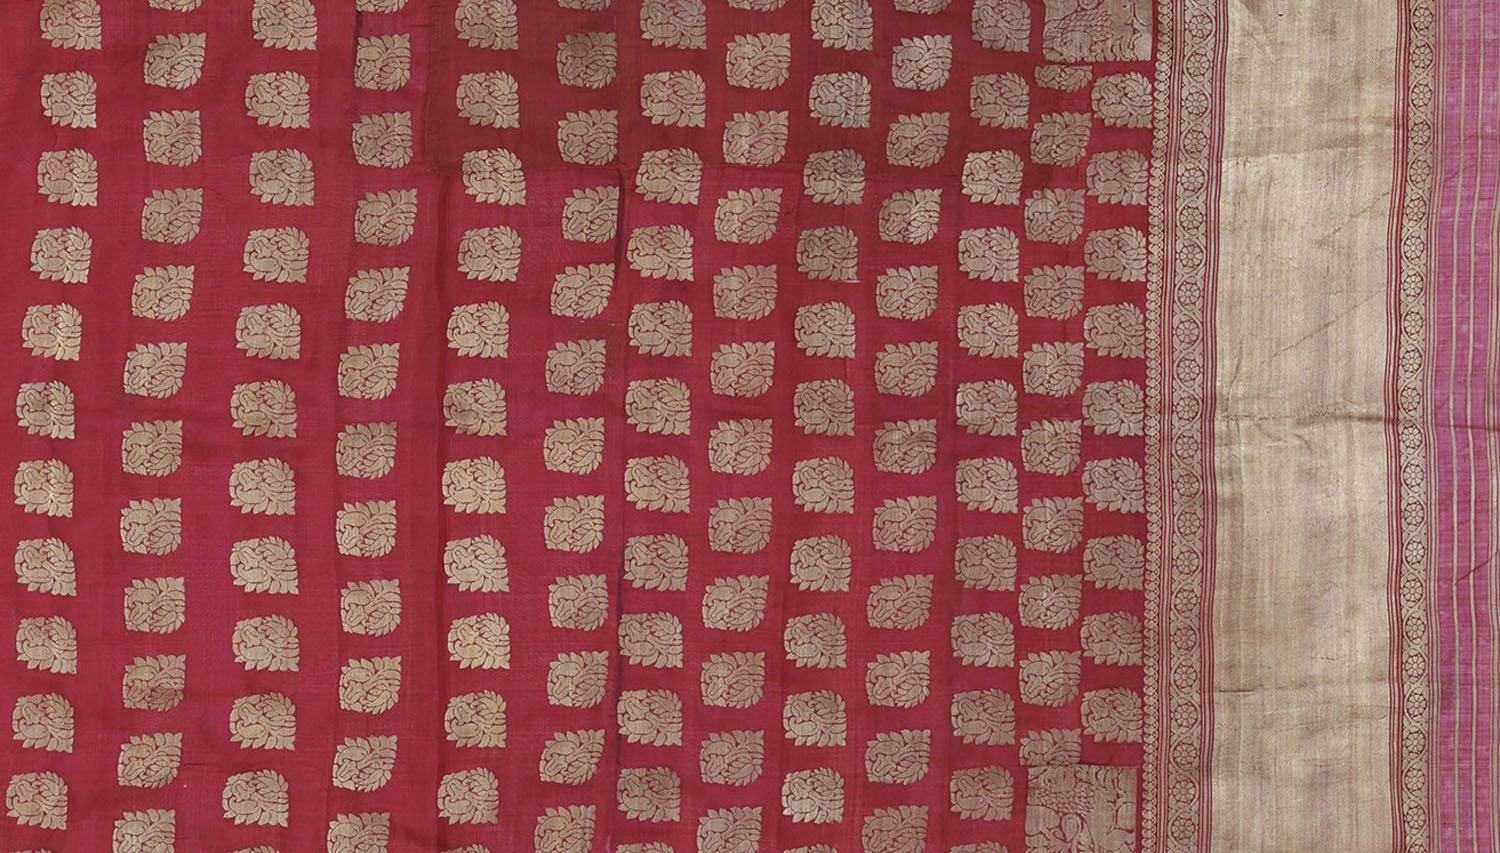 A saree heavily brocaded in gold with a scattered buta motif covering its length.